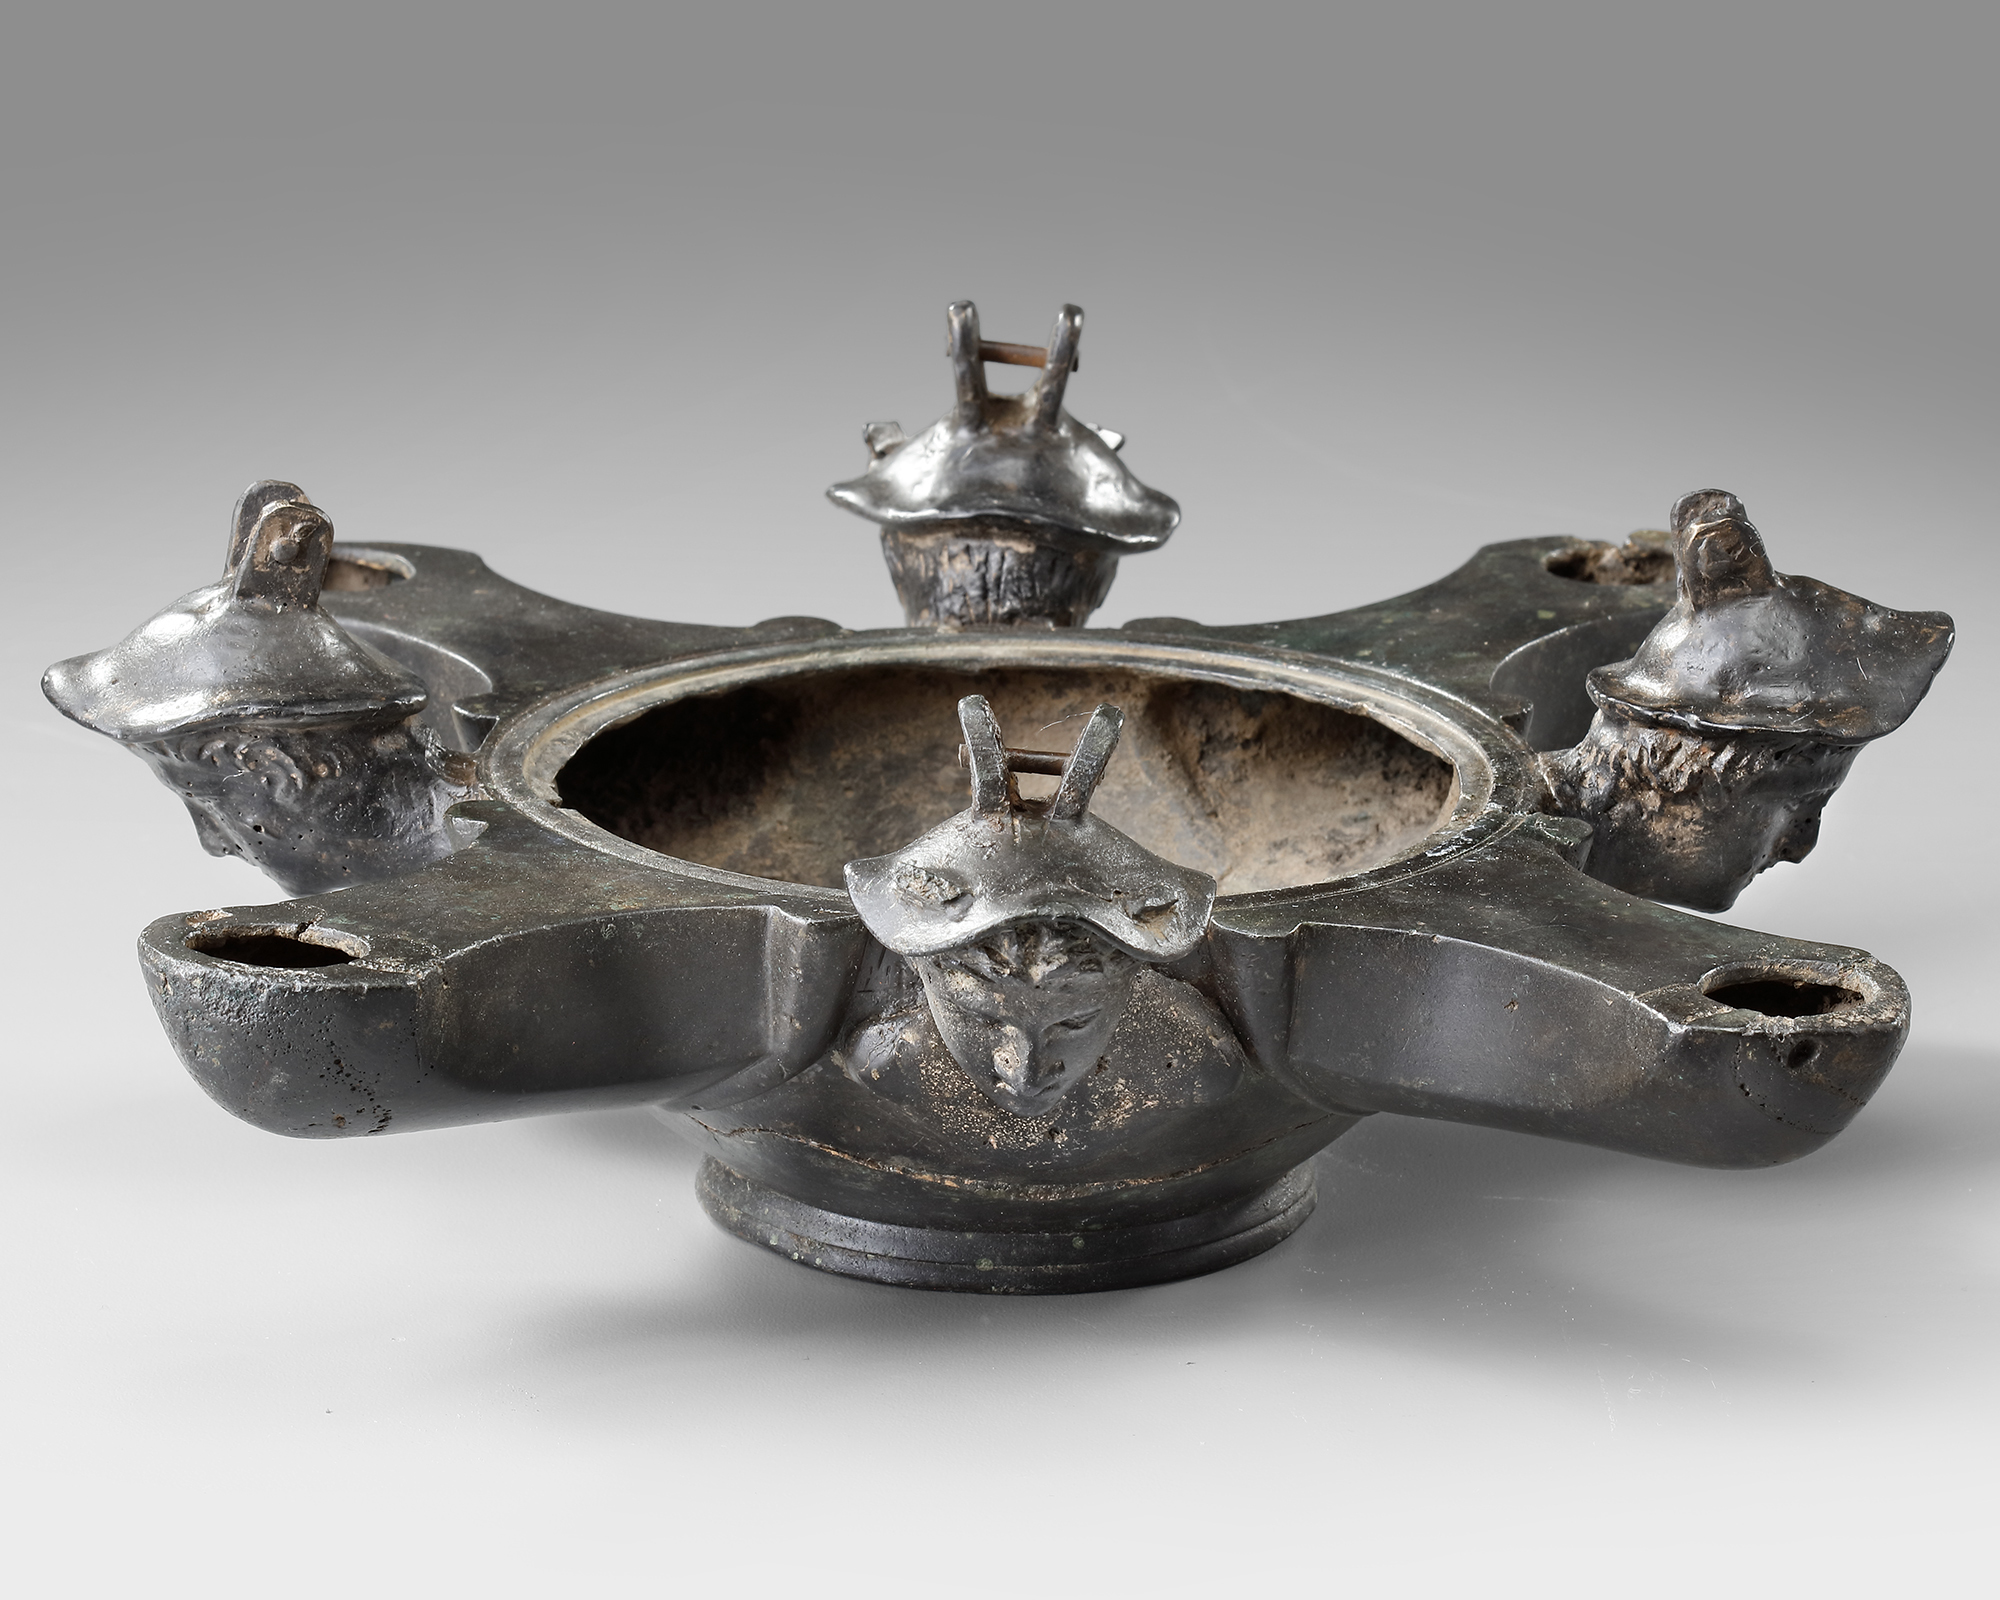 A ROMAN BRONZE OIL LAMP WITH FOUR SPOUTS AND BUSTS OF MERCURY, CIRCA 1ST-2ND CENTURY A.D - Image 3 of 5